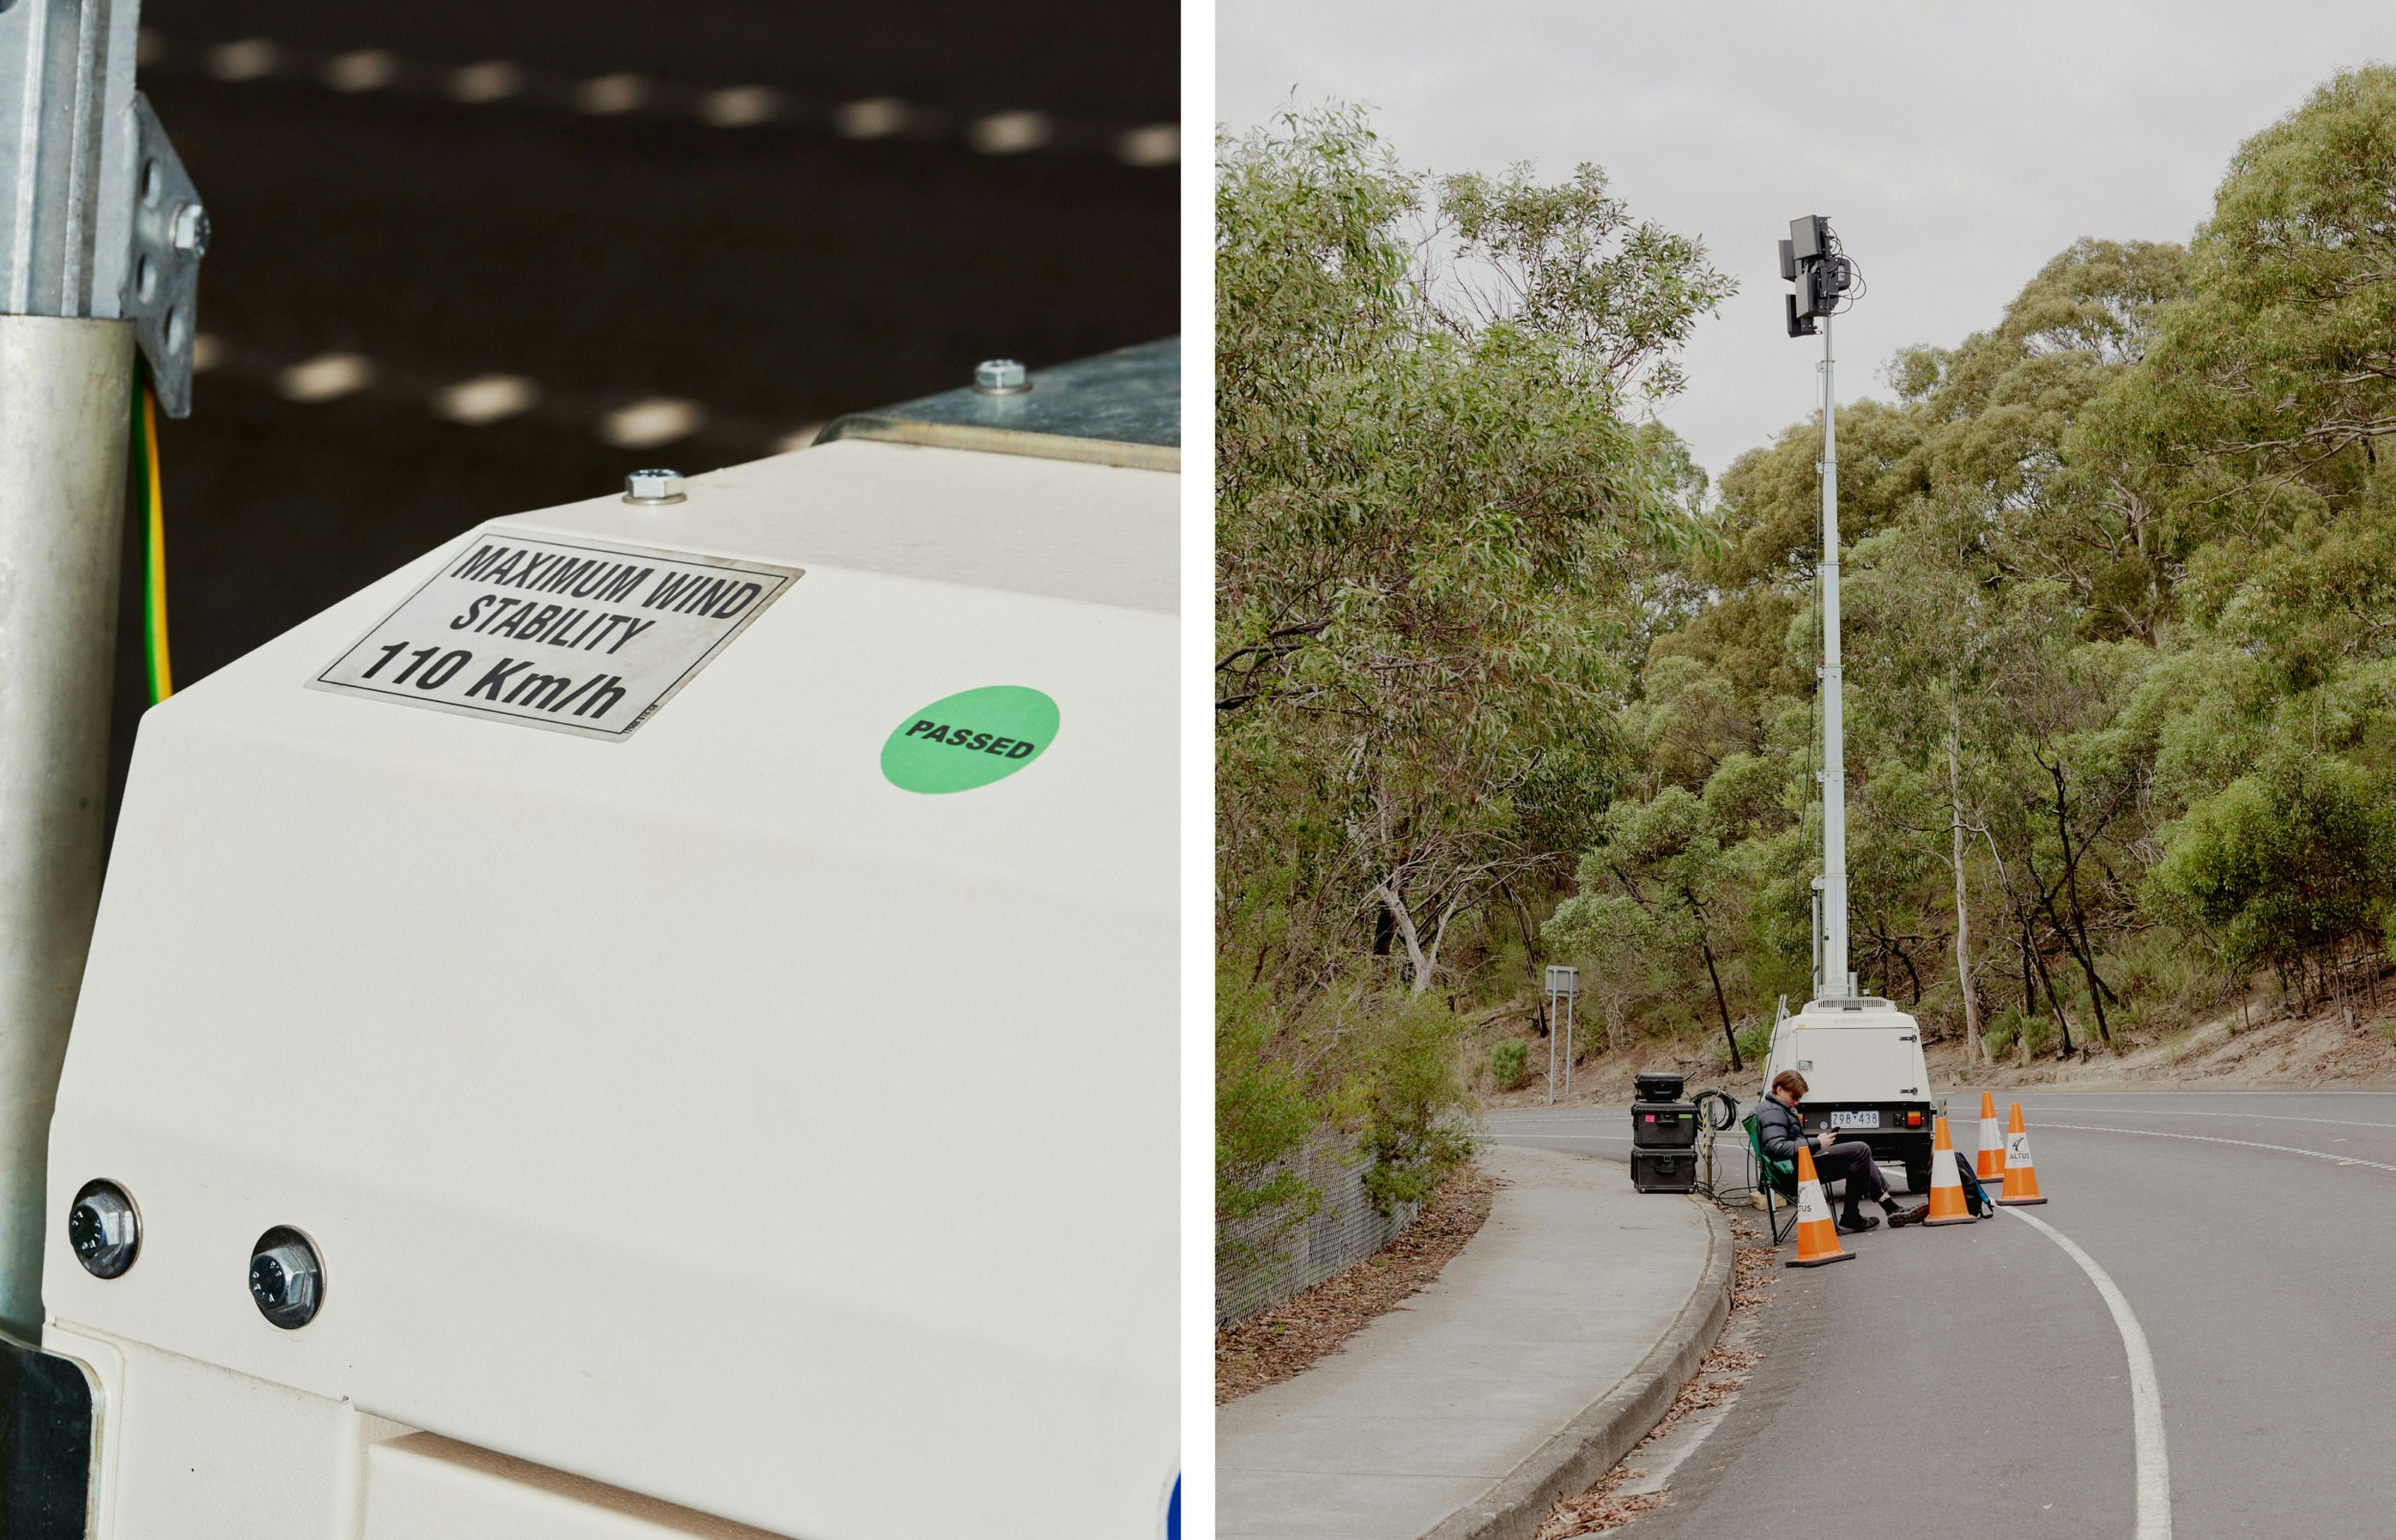 Cherry picker and military throw speakers on Yarra blvd for The Rivers Sing shot by Nicholas Wilkins 